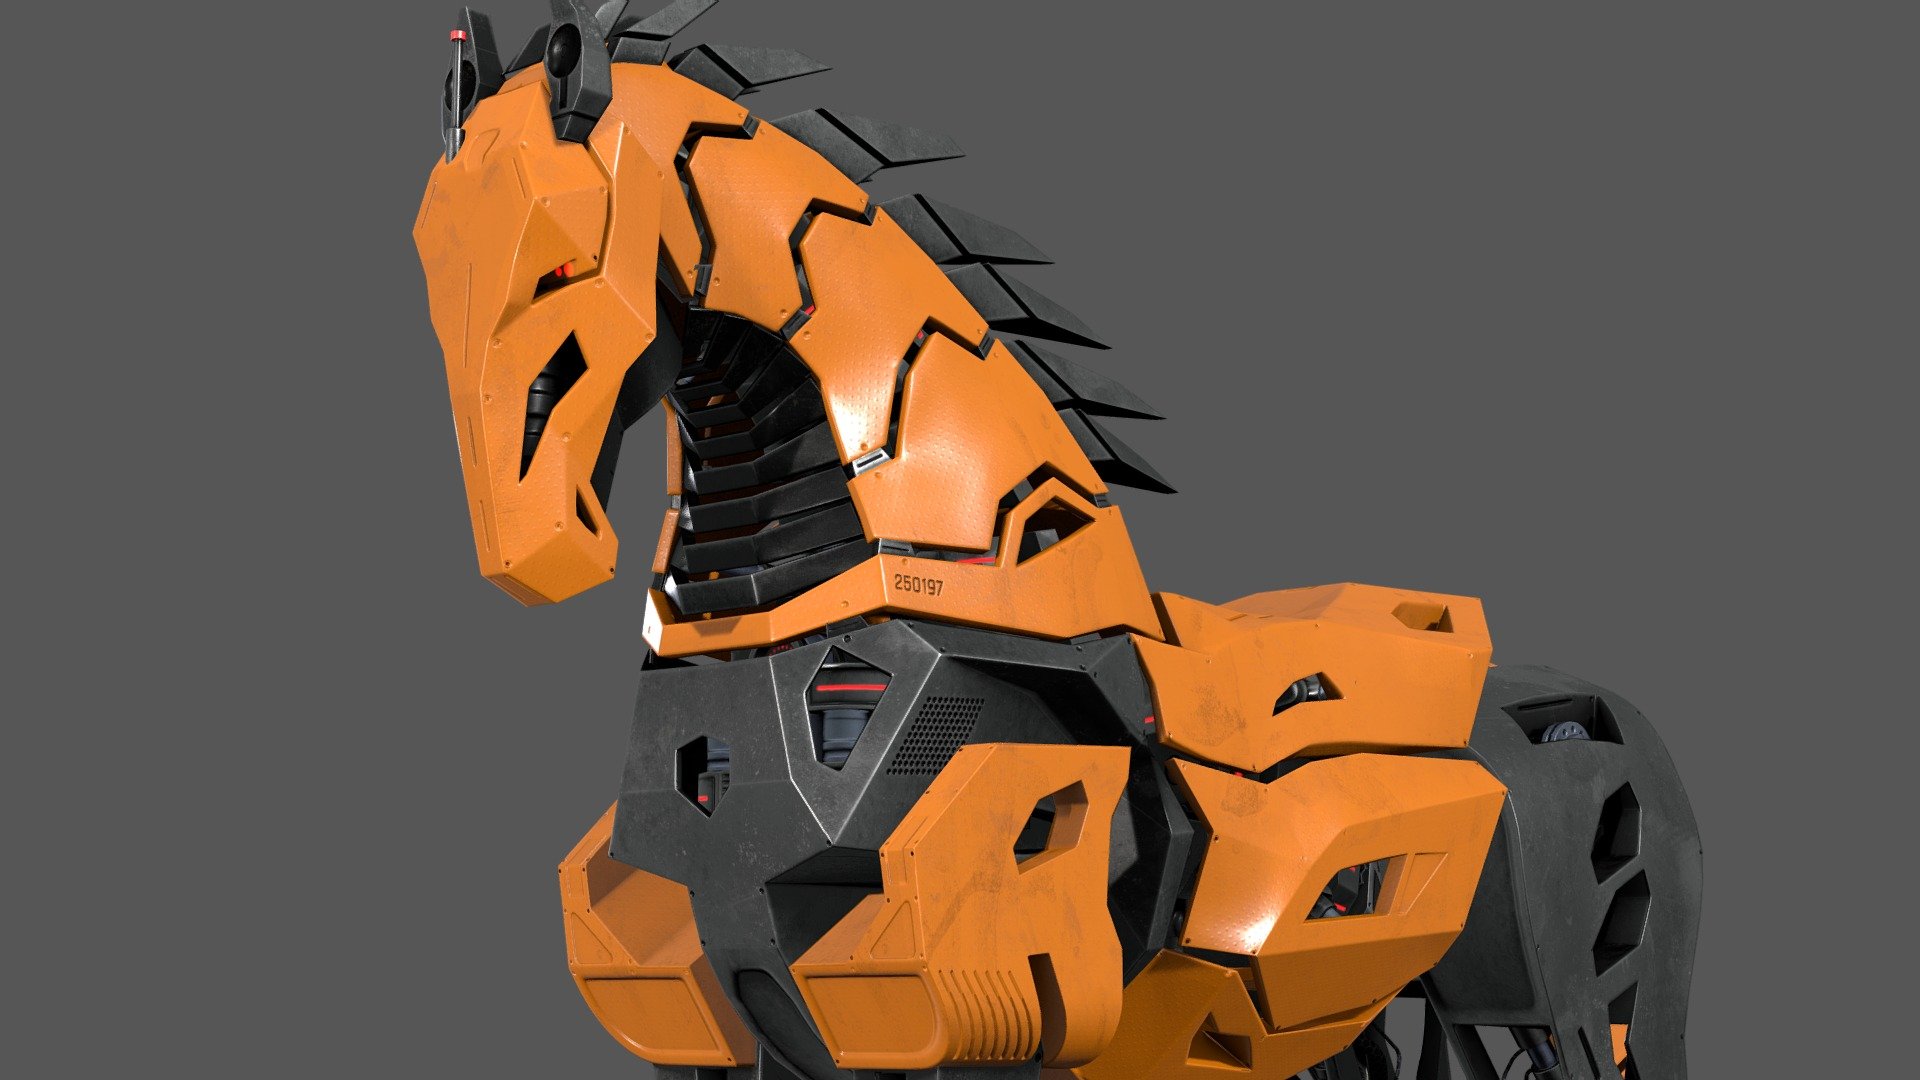 Sci-Fi horse Low-poly 3D model

43 940 Triangles

Texture Map 4k / PNG (3 texture set) 

Base color | Normal | Roughness | Metalness | AO | Emissive

Files format : FBX

https://www.cgtr ader.com/3d-model s/animals/mammal/sci-fi-mech-horse - Sci-Fi mech horse - 3D model by LIFEvKIFE 3d model